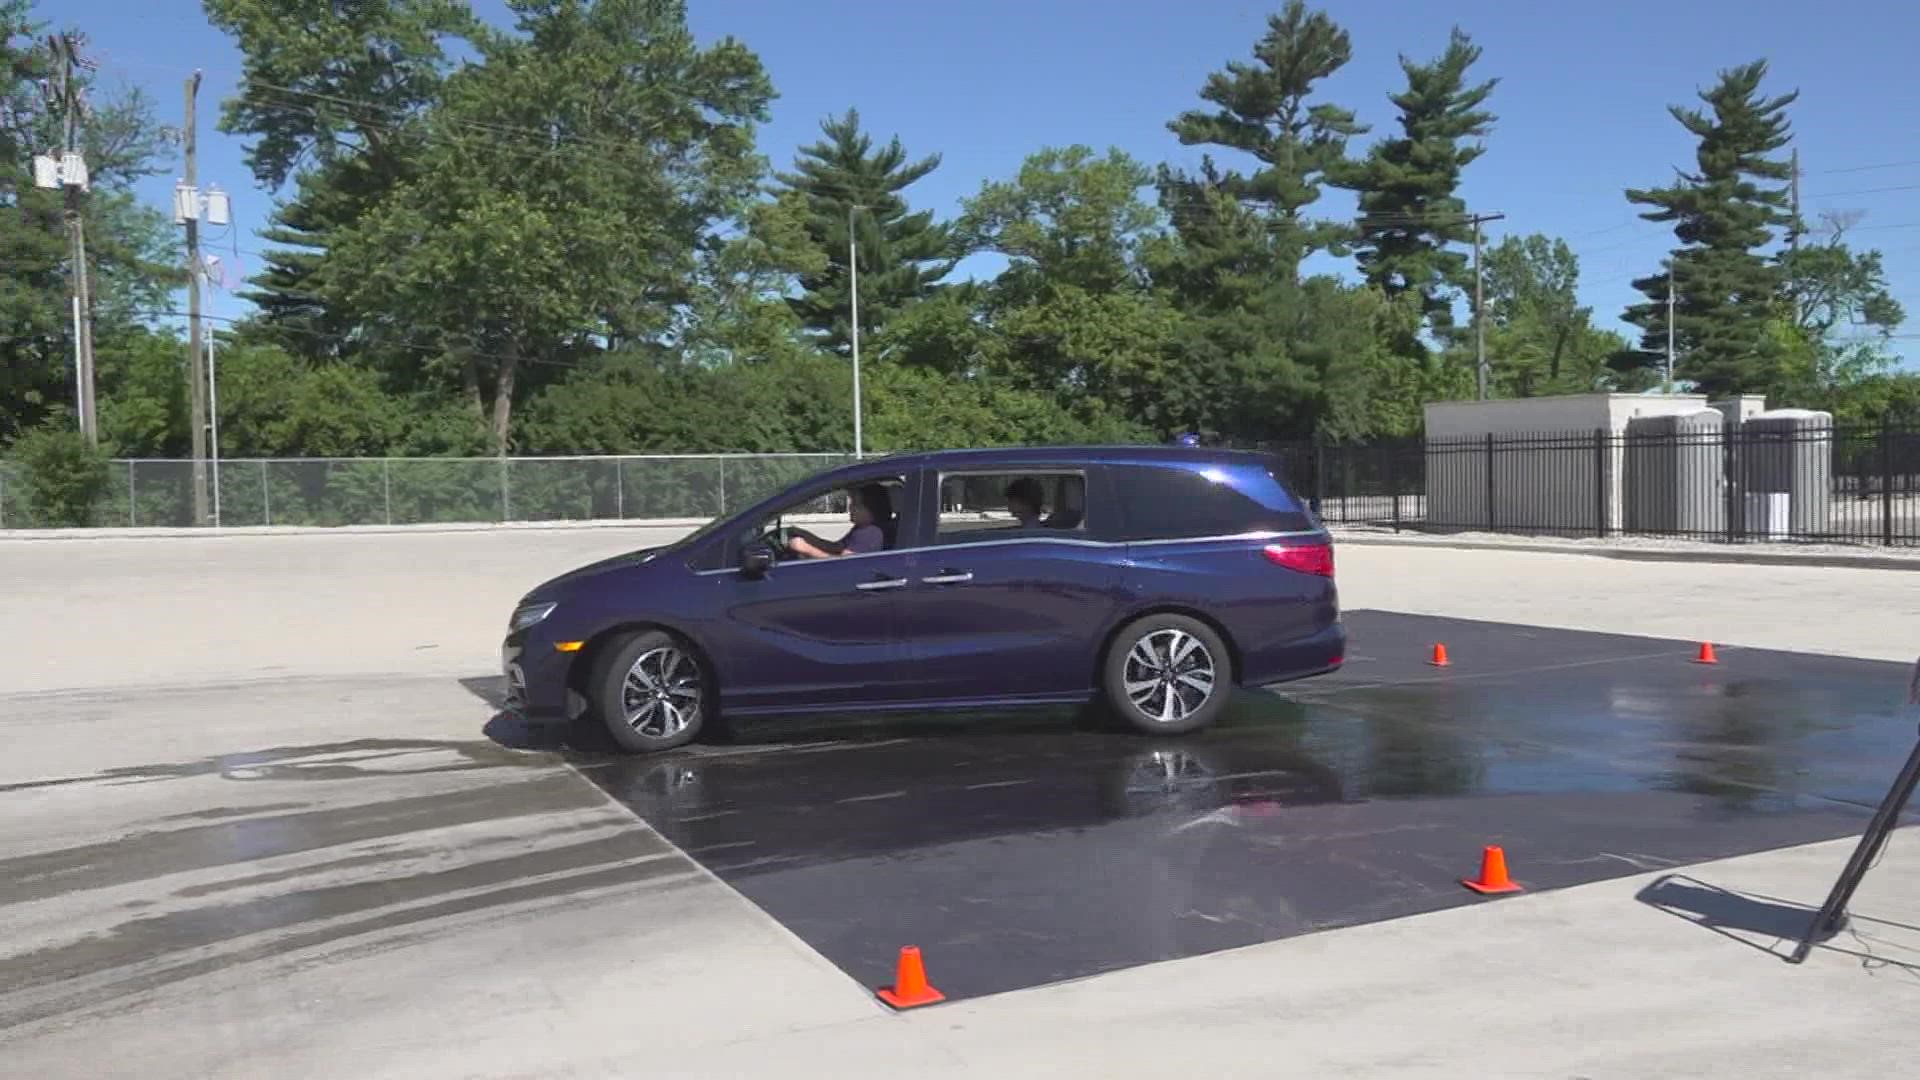 Young drivers took part in free defensive driving courses Saturday.